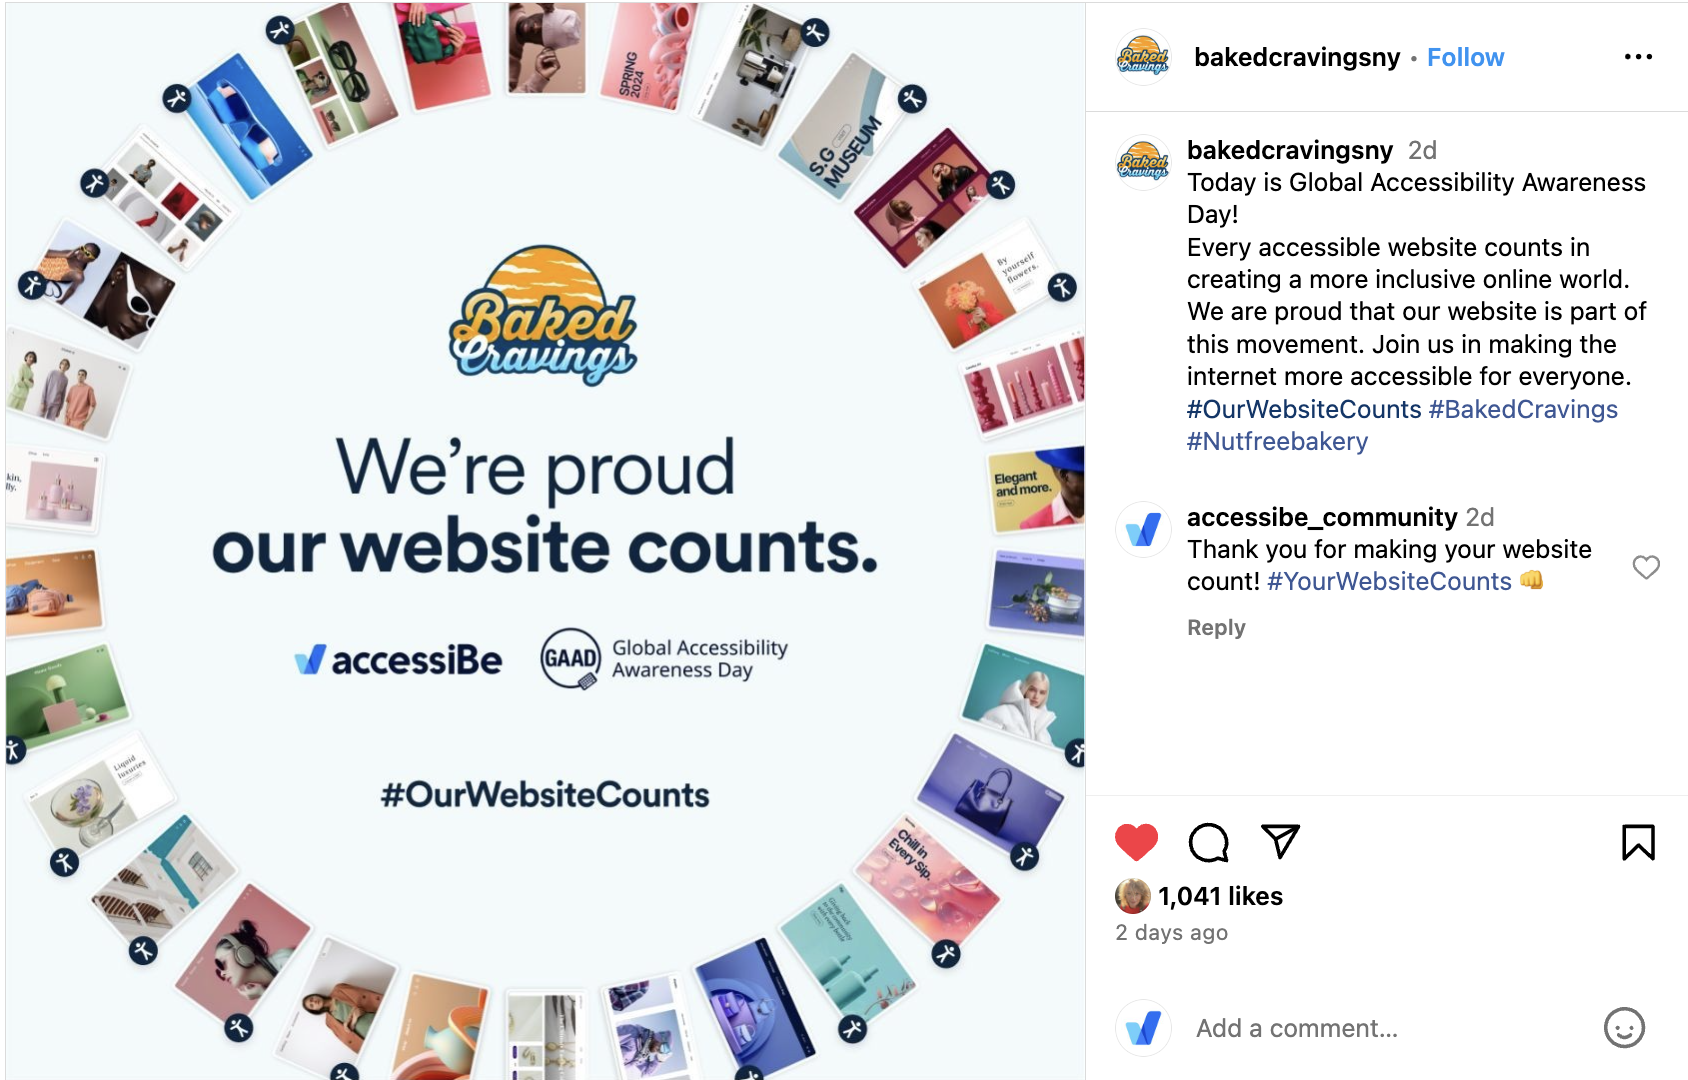 Instagram post by Baked Cravings NY of their logo on the accessiBe design that says We're proud our website counts. The accessiBe logo and the Global Accessibility Awareness Day logo. The post has 1,041 likes.